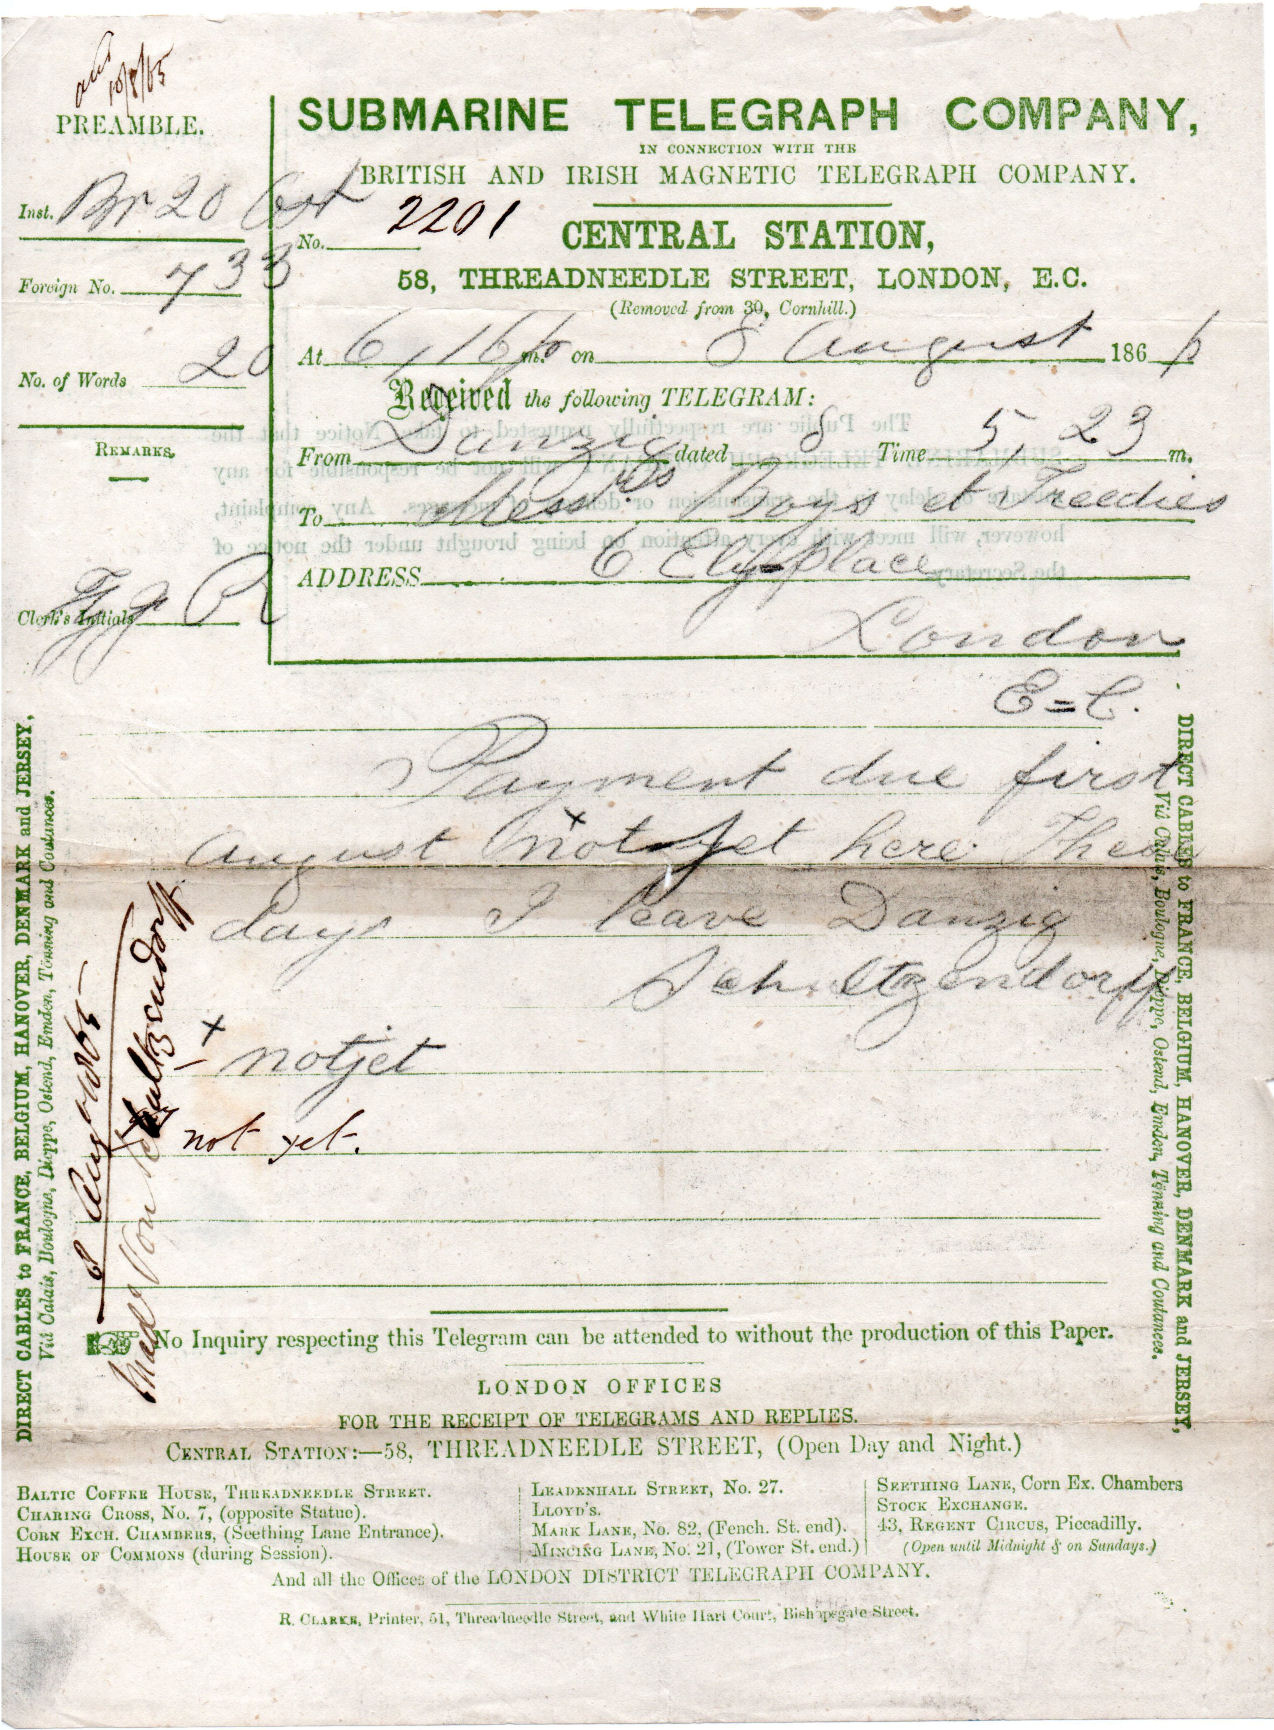 Submarine Telegraph Co. 1865 form - front